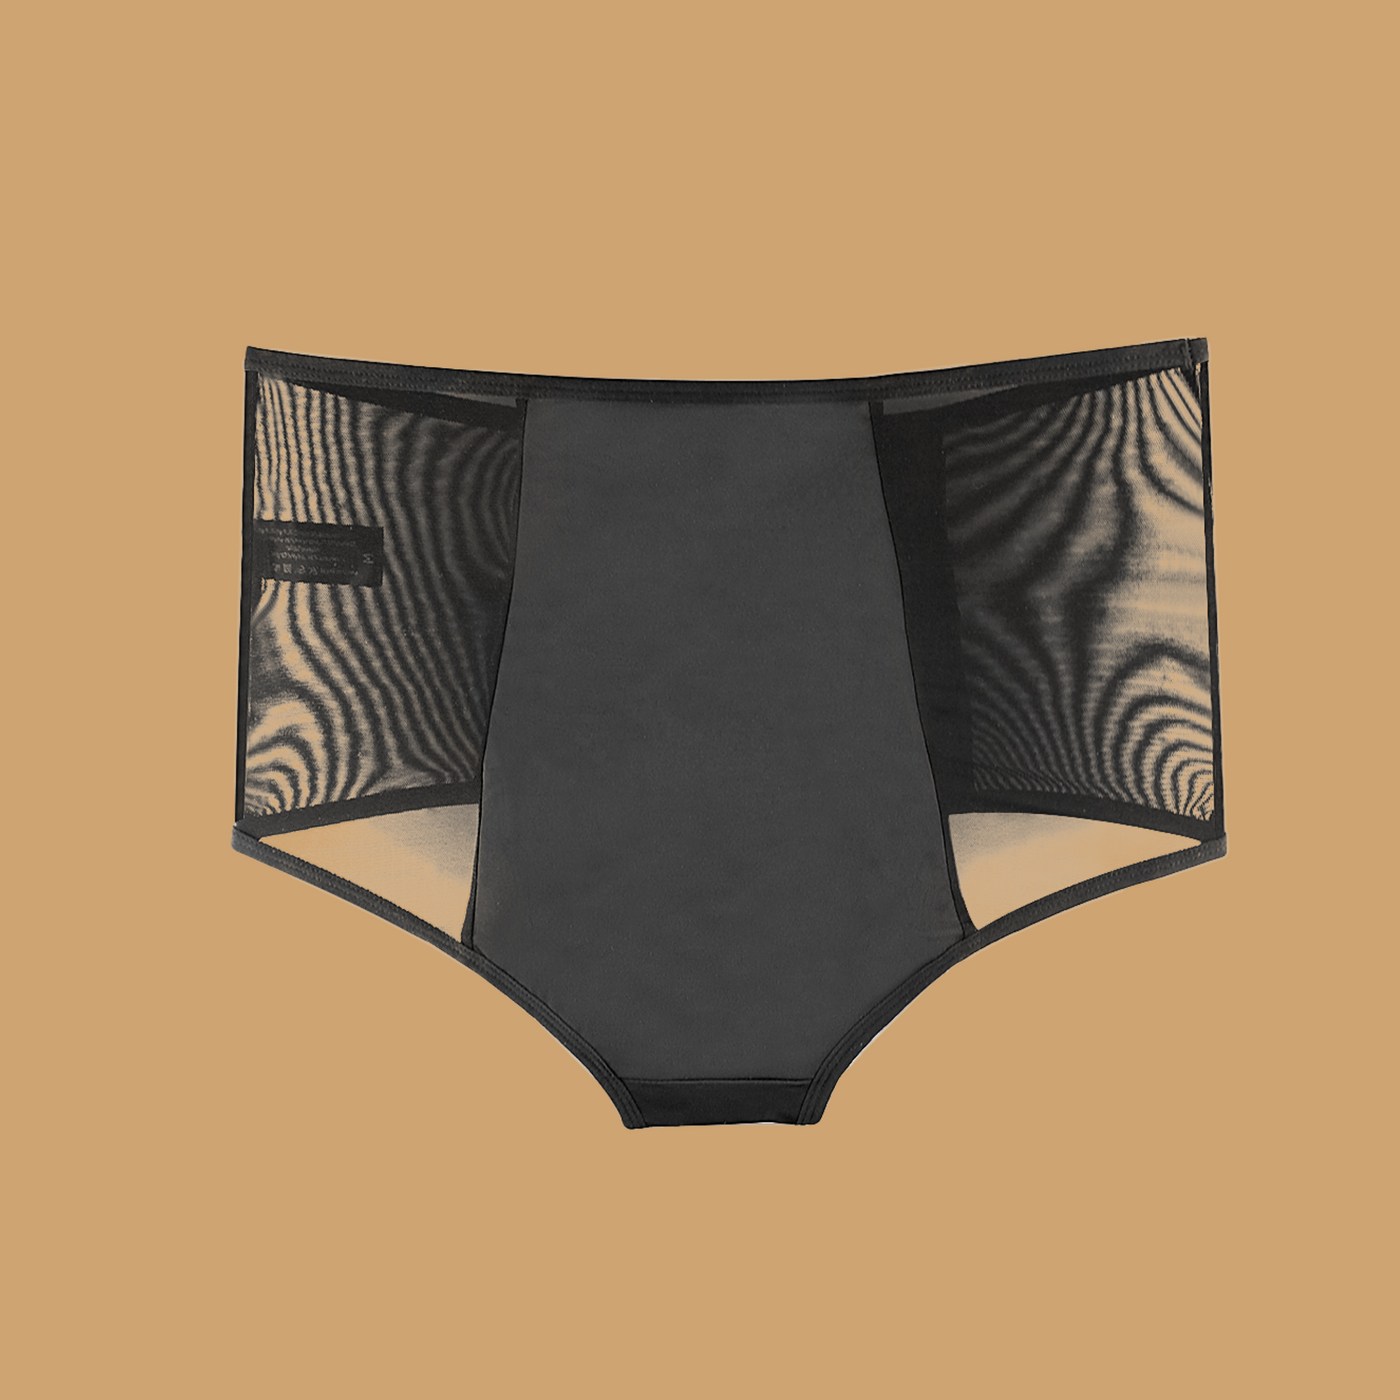 Ivy High Waist Period Underwear - for all-day wear and comfort